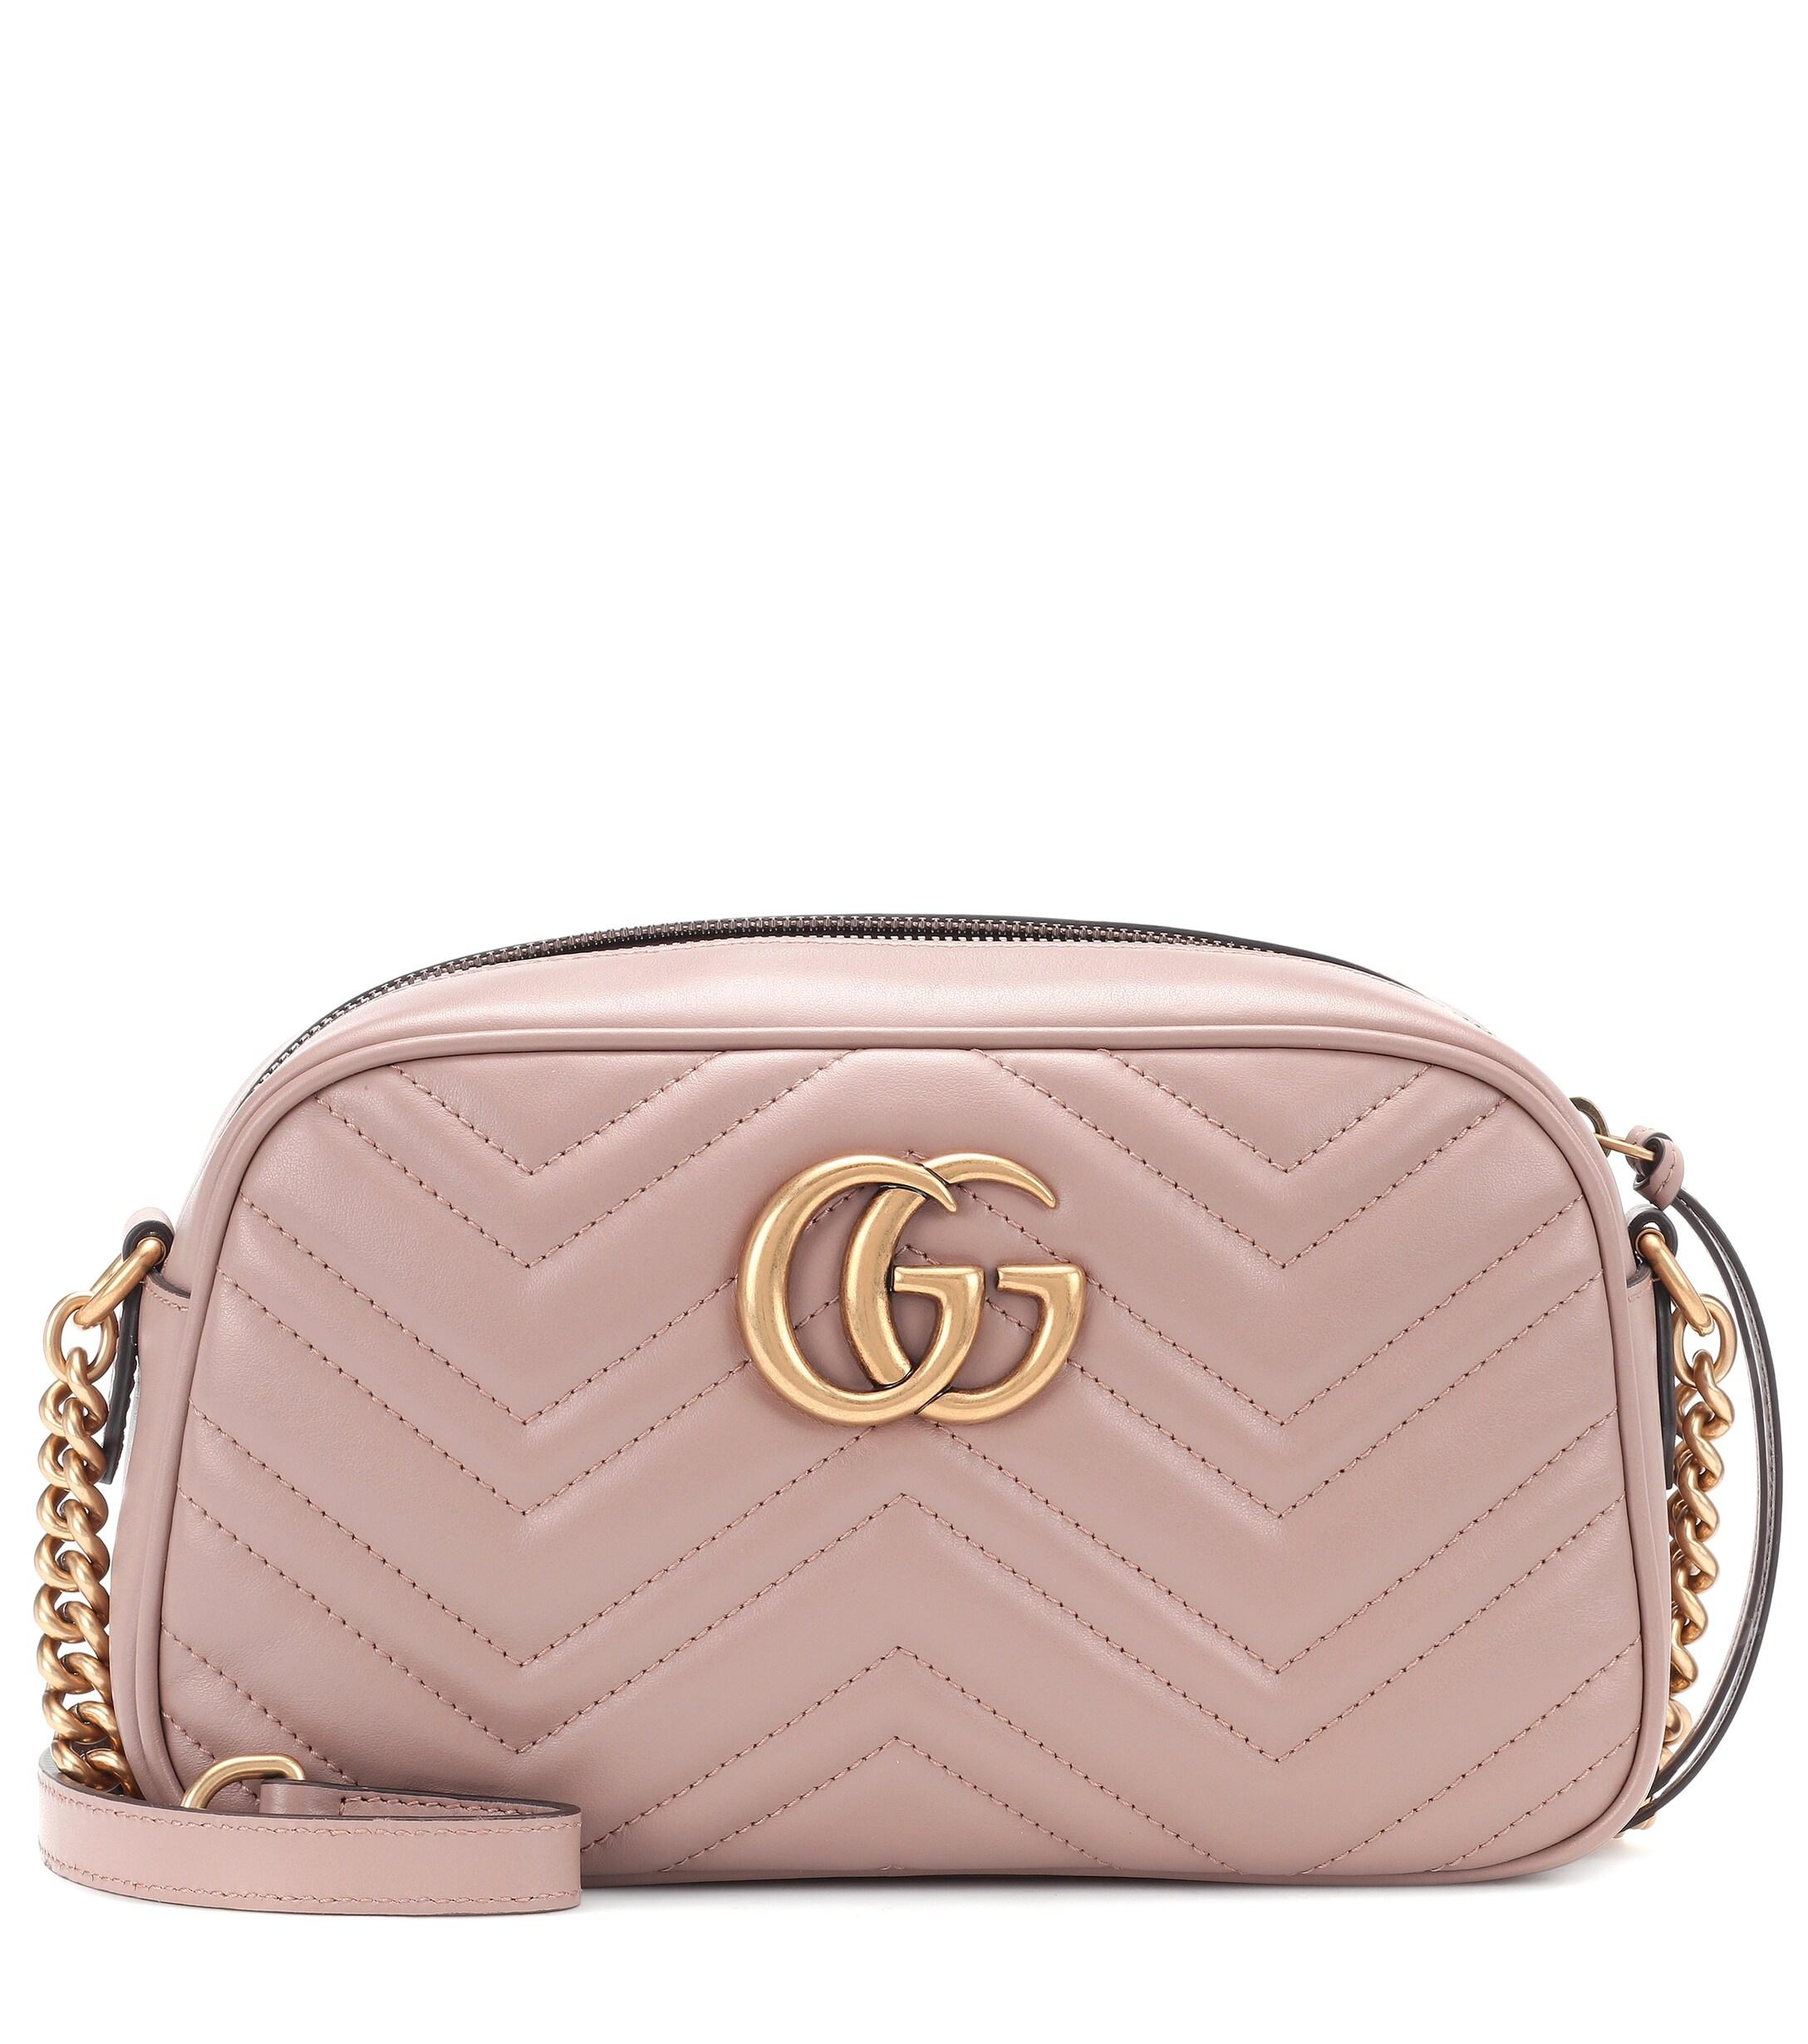 Gucci GG Marmont Small Leather Shoulder Bag in Pink - Lyst